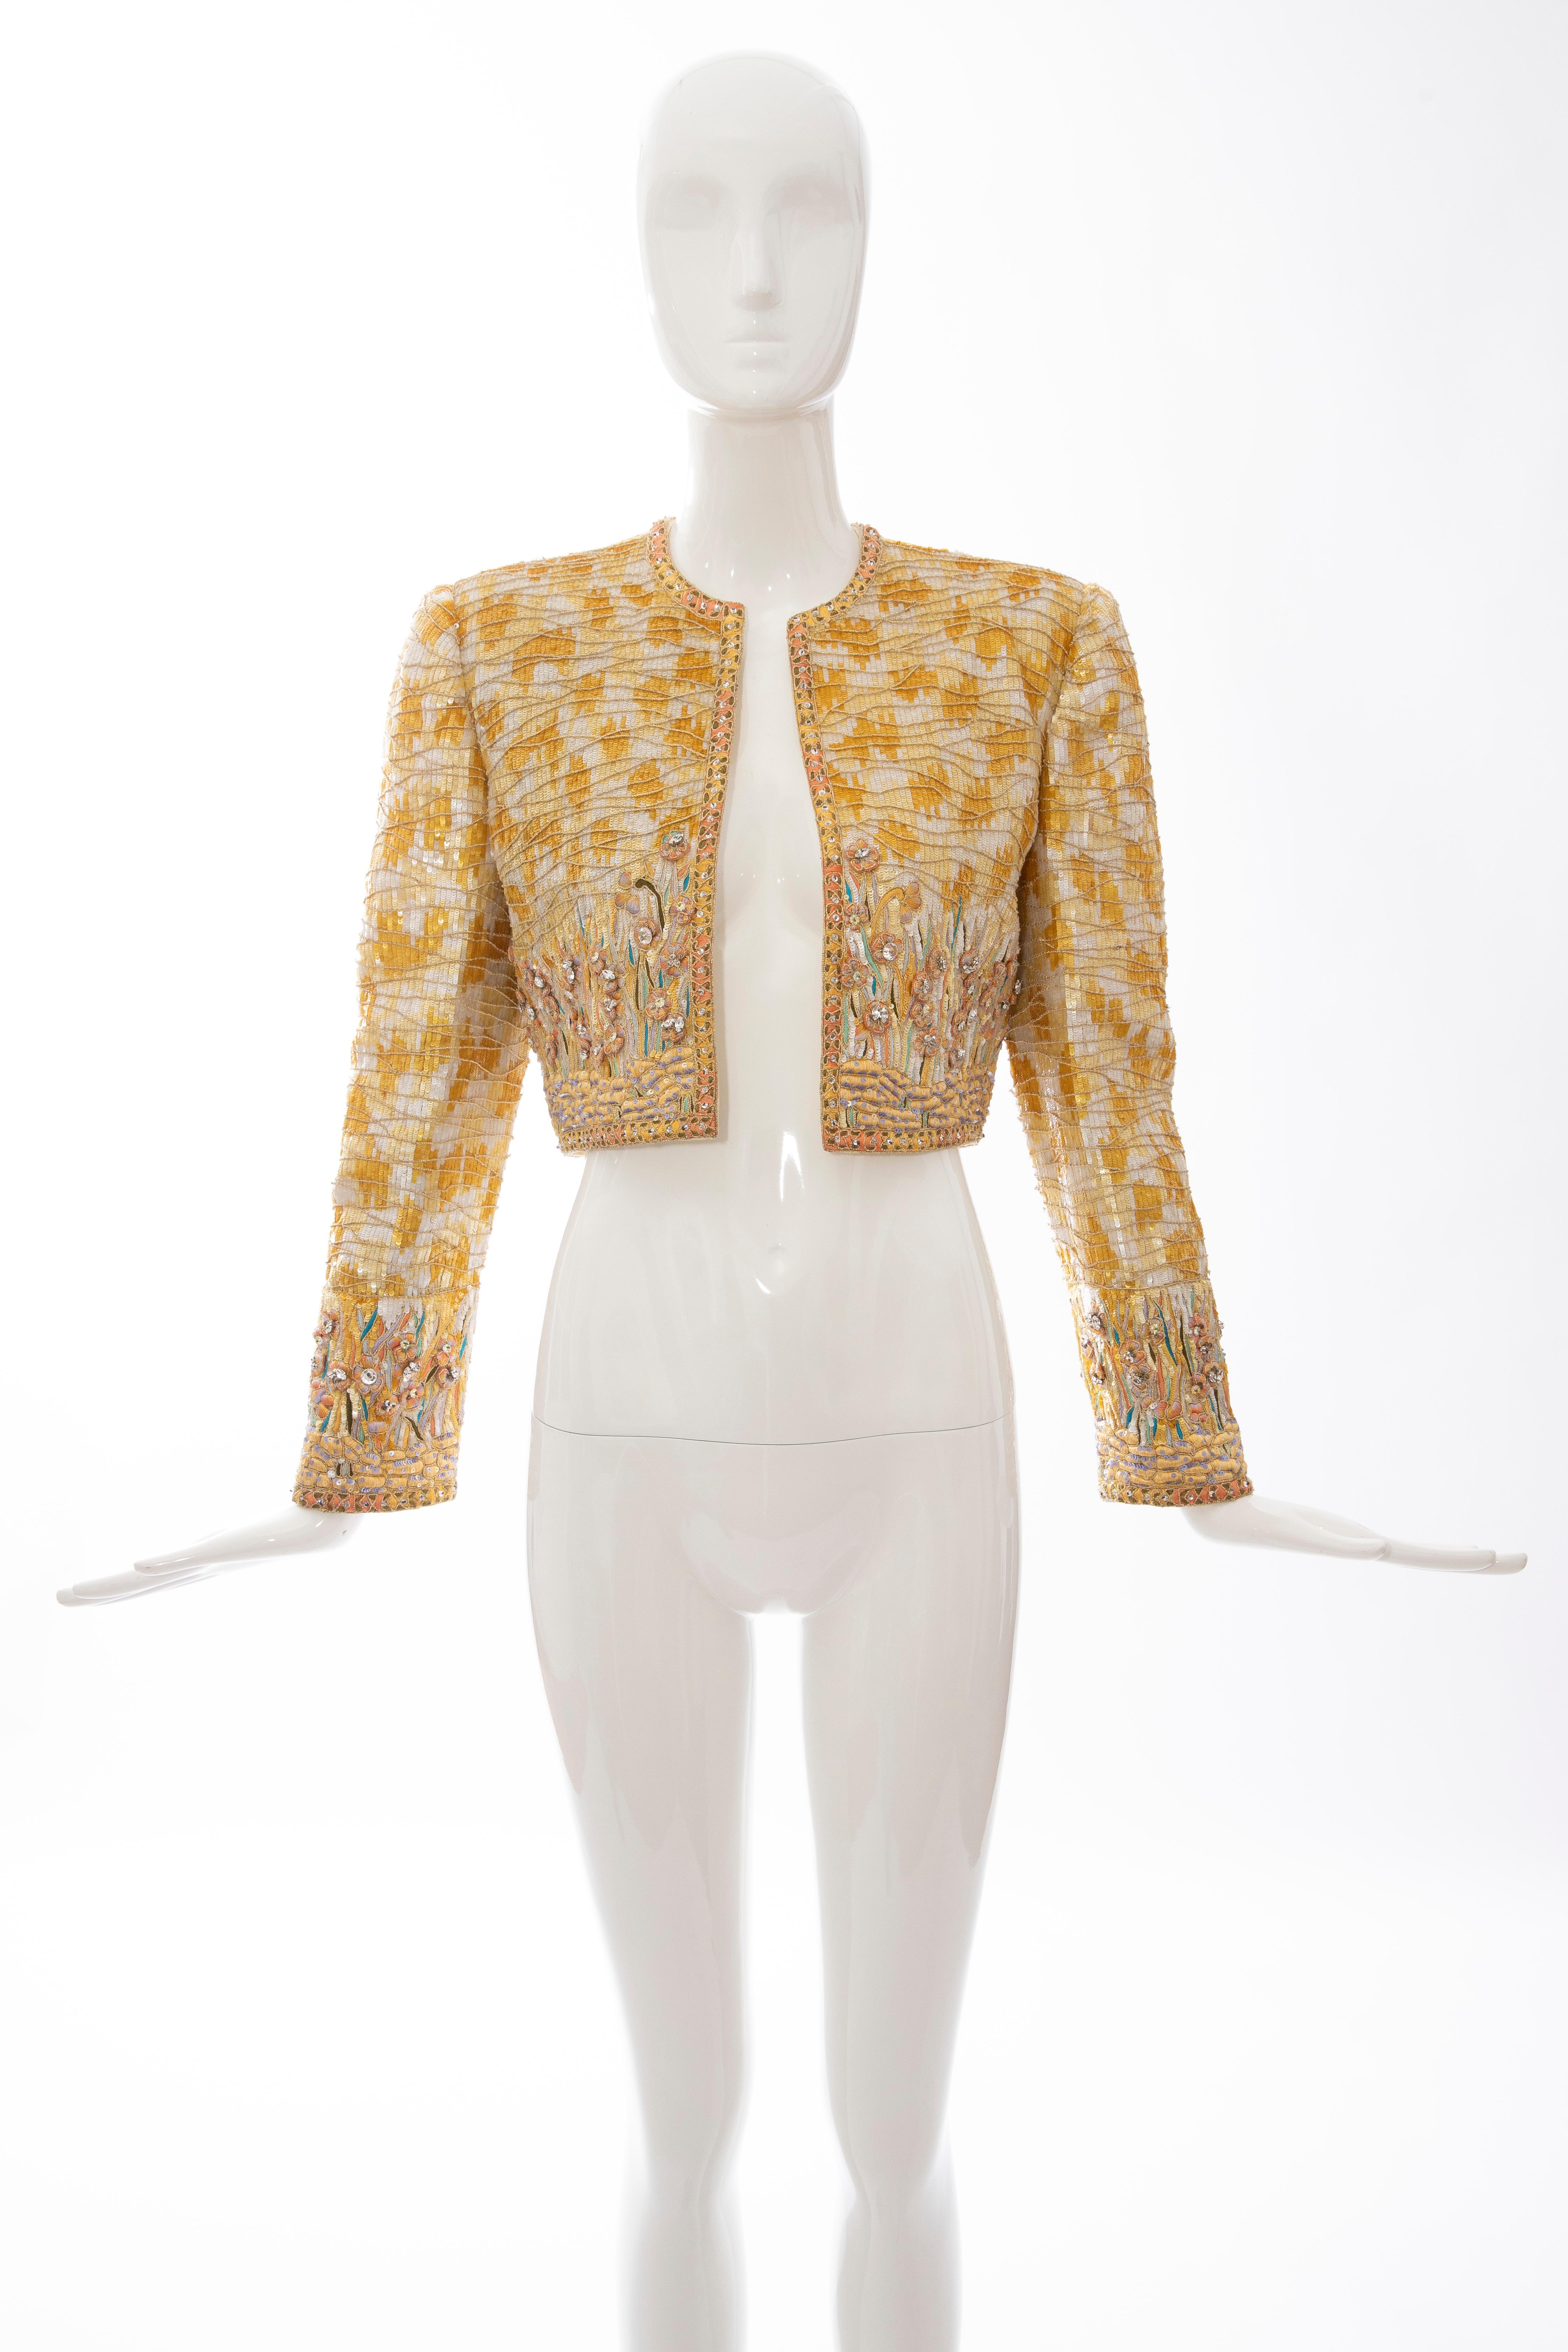 Mary McFadden Couture silk open front embroidered sequins diamanté evening bolero jacket with padded shoulders and fully lined in silk.

US.2
Bust: 36, Waist: 32, Shoulder: 15, Length: 16.5, Sleeve: 27

Fabric: 100% Silk